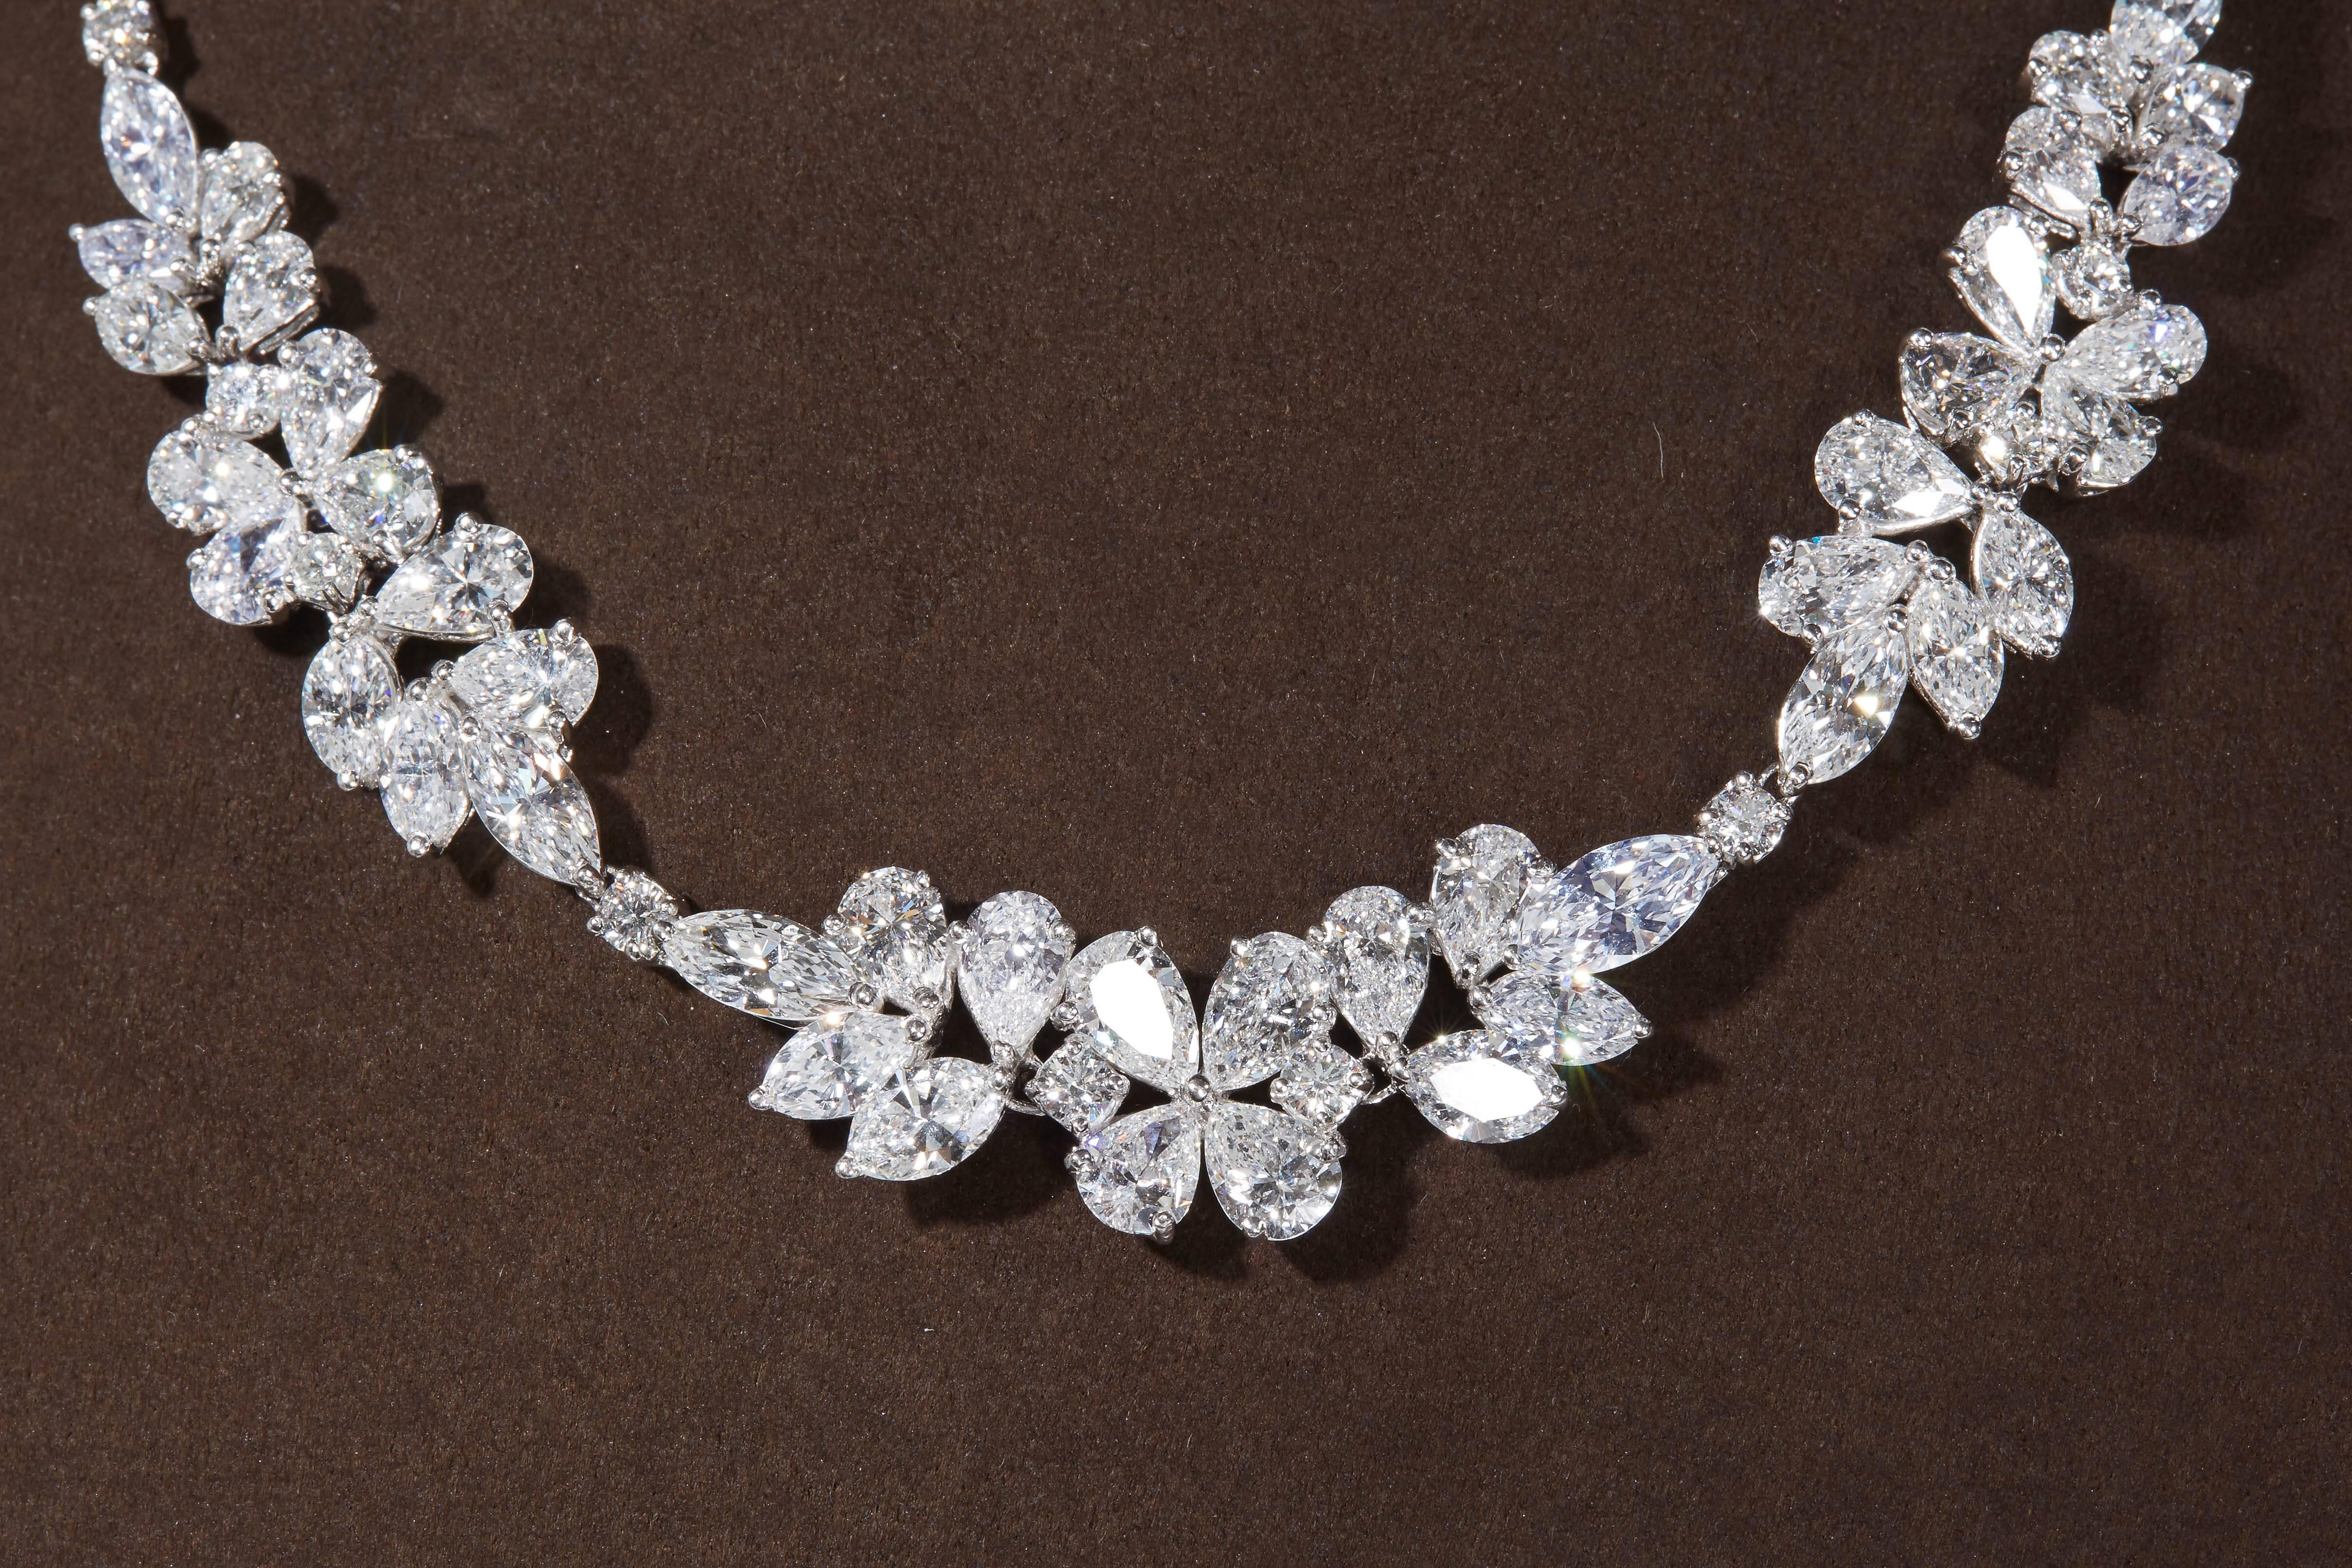 
An important diamond necklace made up of three important clusters.

32.81 carats of large sized white pear, marquise and round brilliant cut diamonds.

Made in New York and set in platinum.

Just under 16 inches in length.